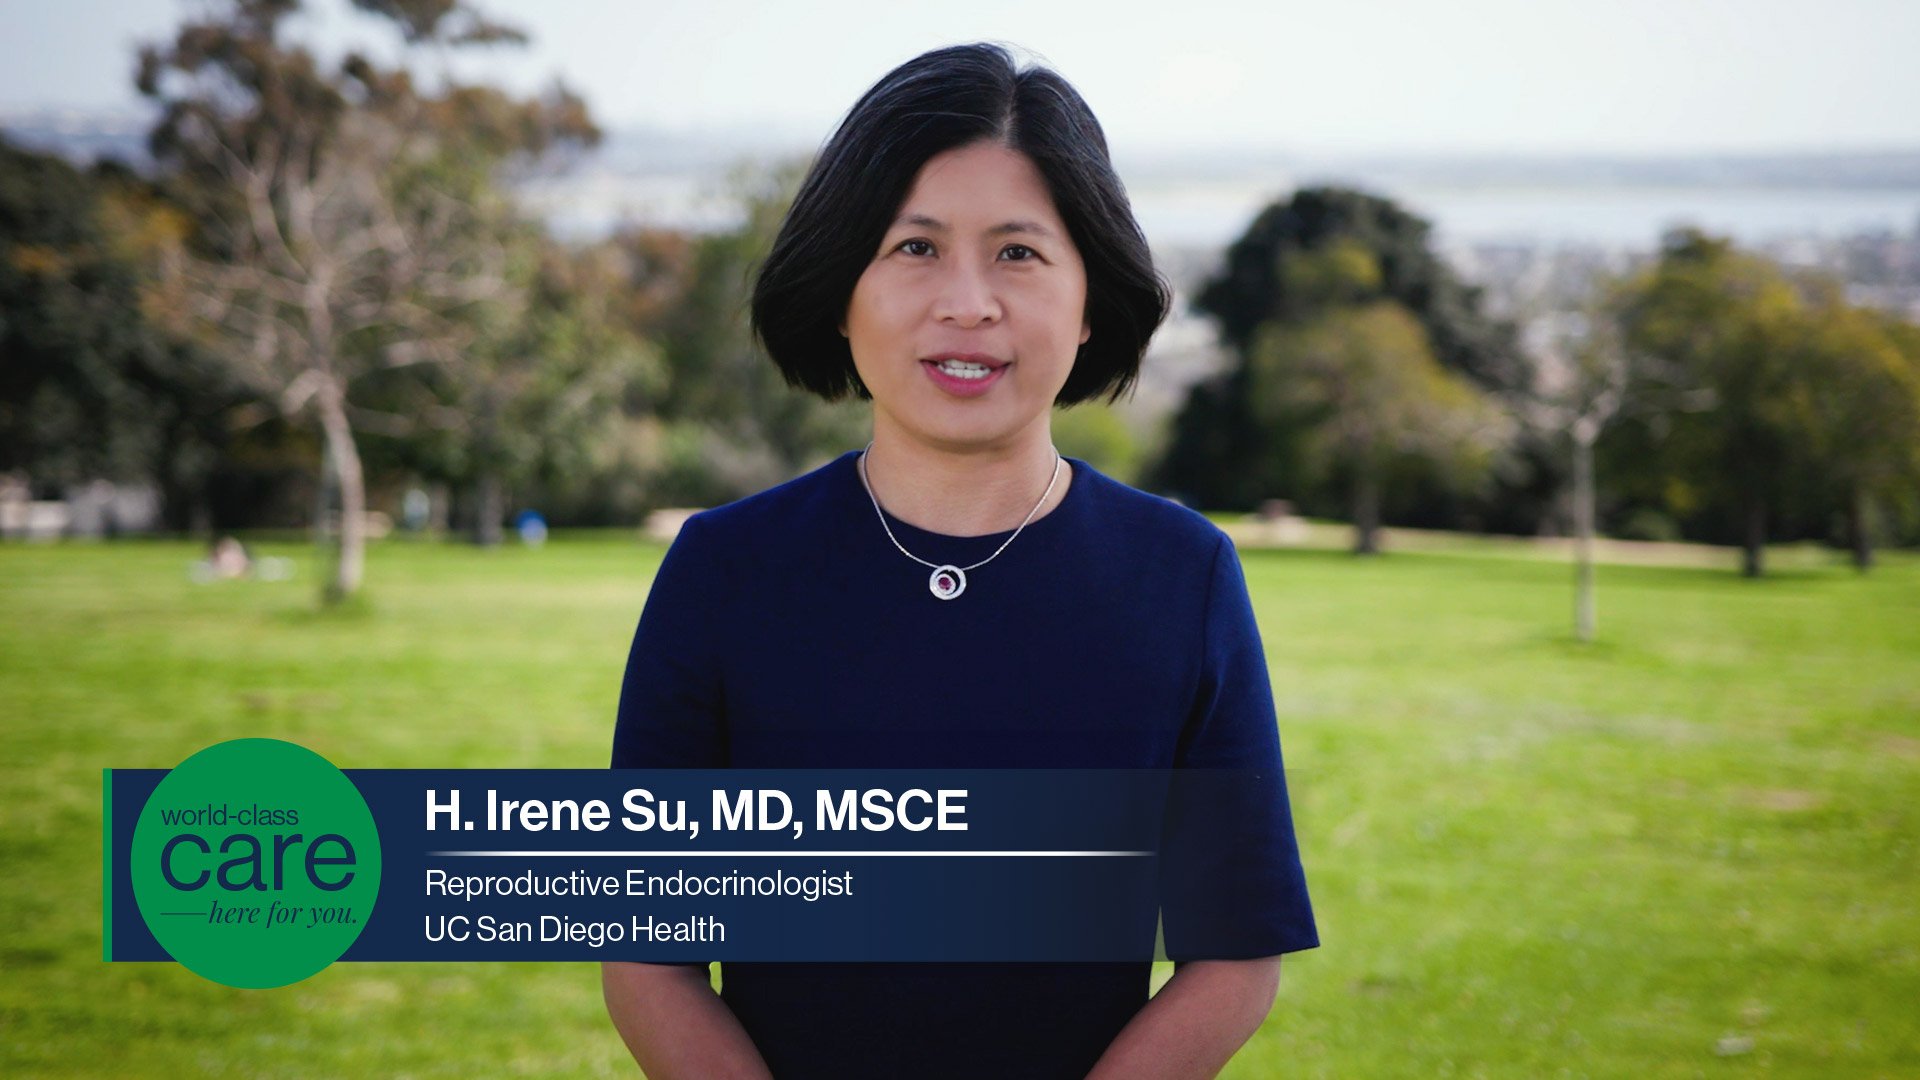 Fertility expert Dr. H. Irene Su shown with a graphic with the words "world-class care here for you"